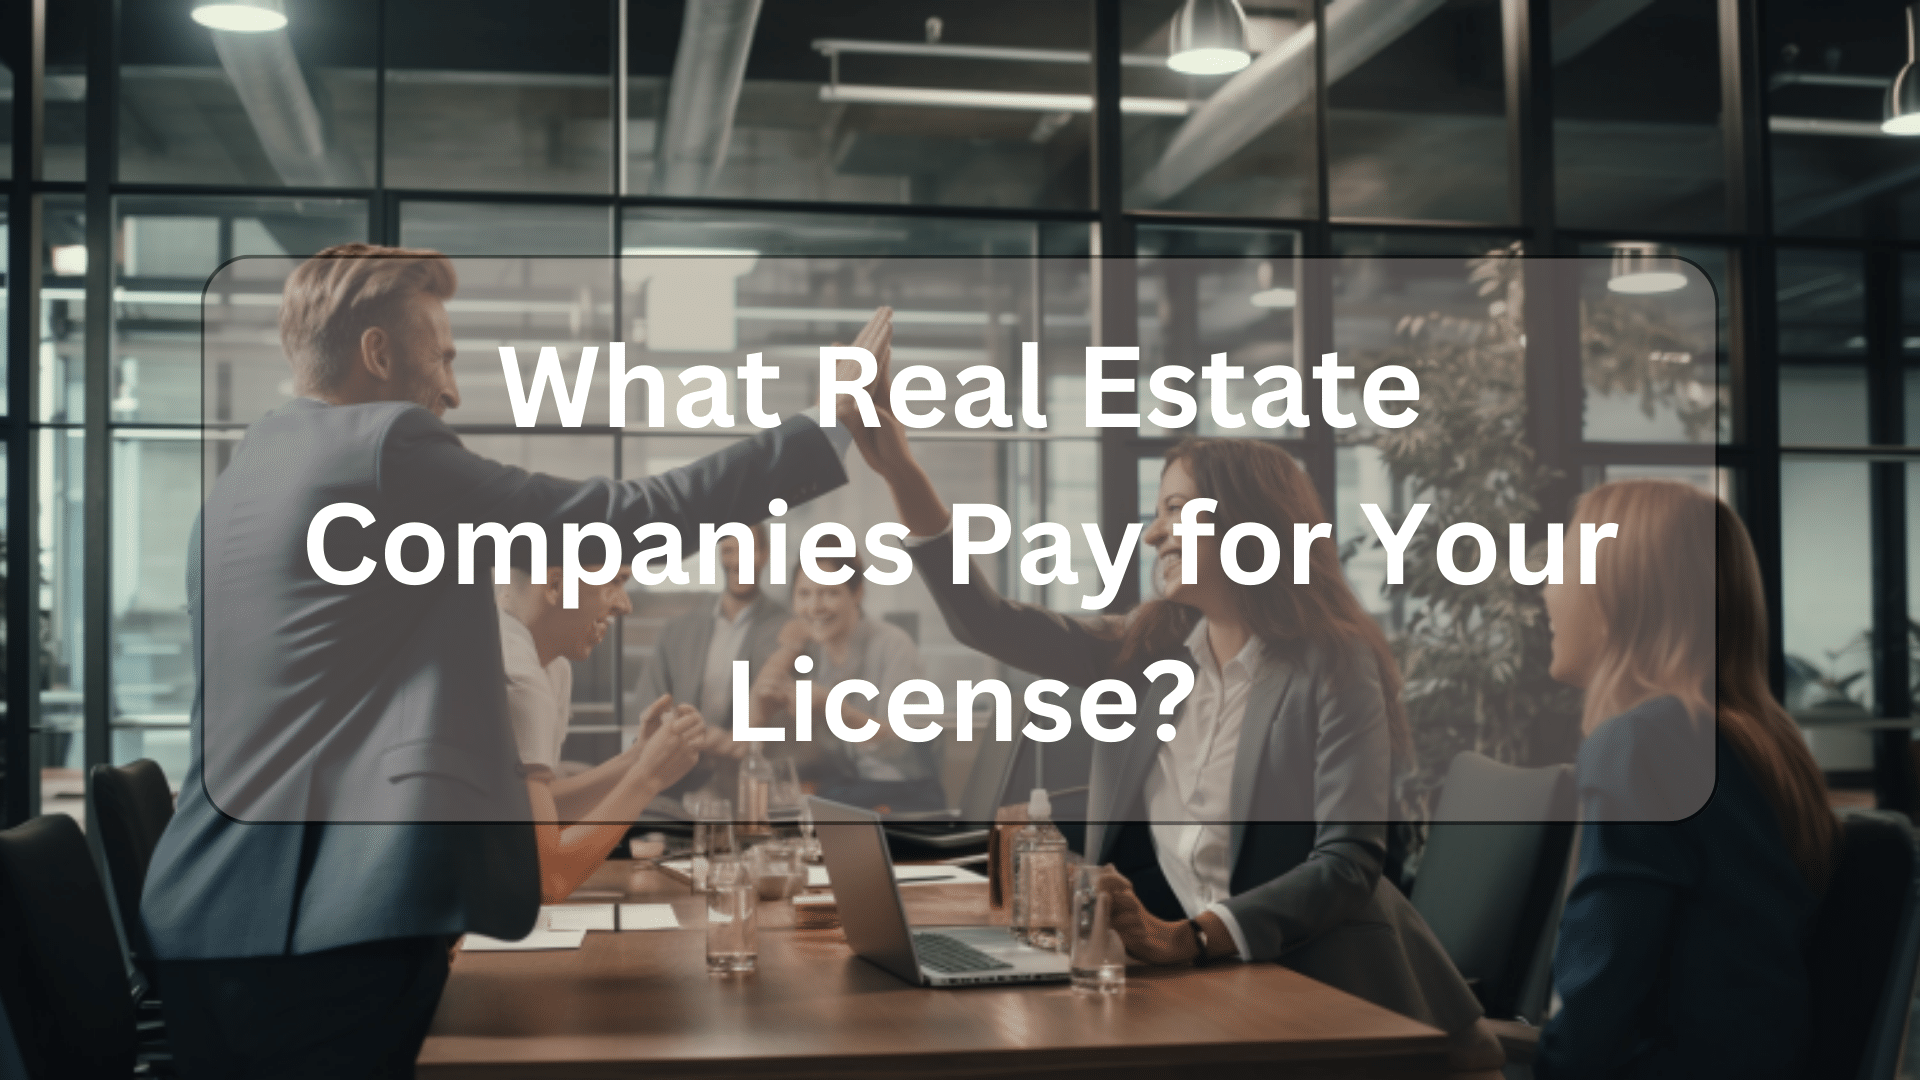 What Real Estate Companies Pay for Your License?